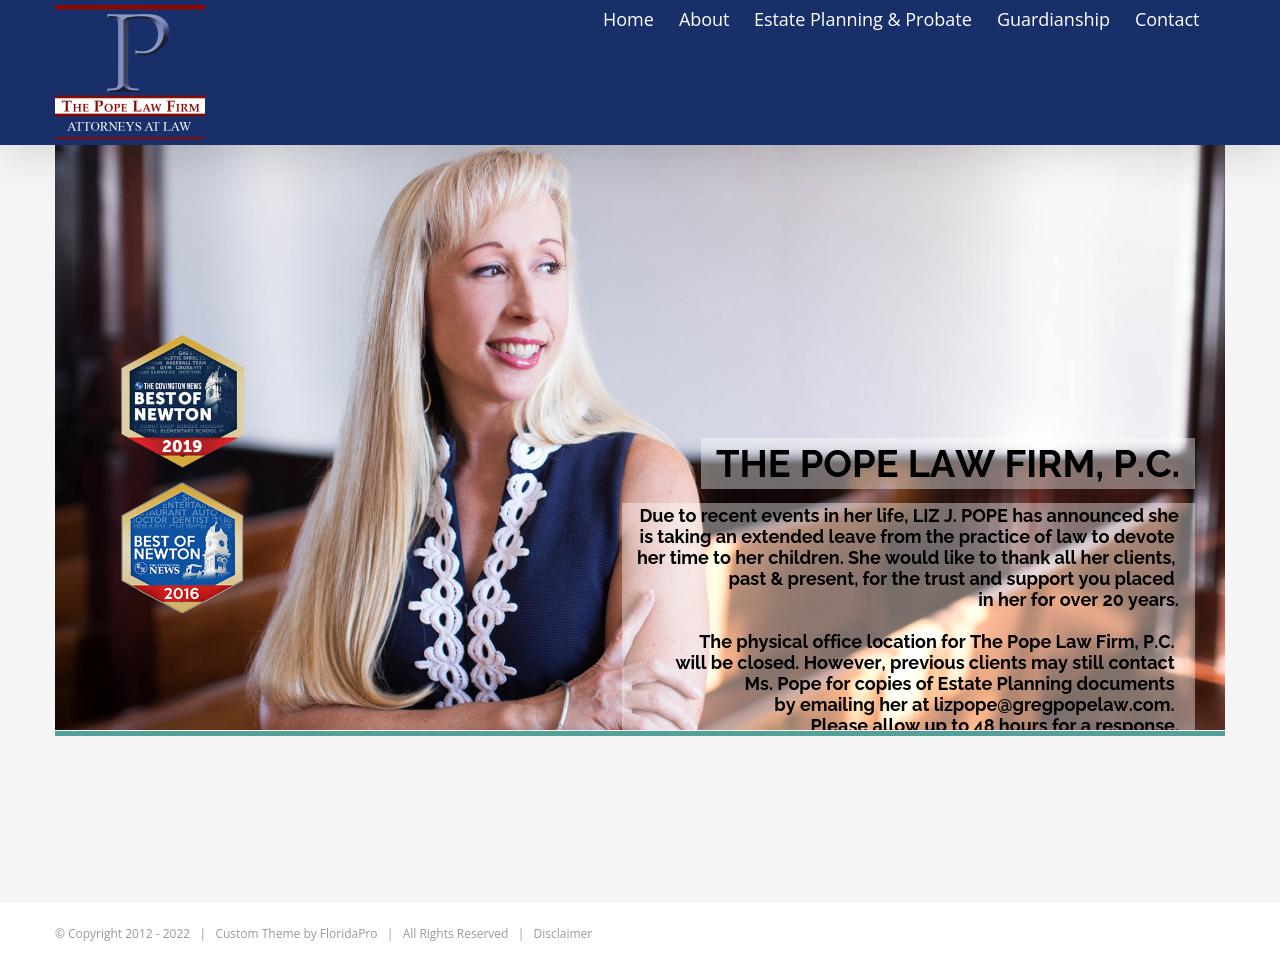 The Pope Law Firm PC - Covington GA Lawyers